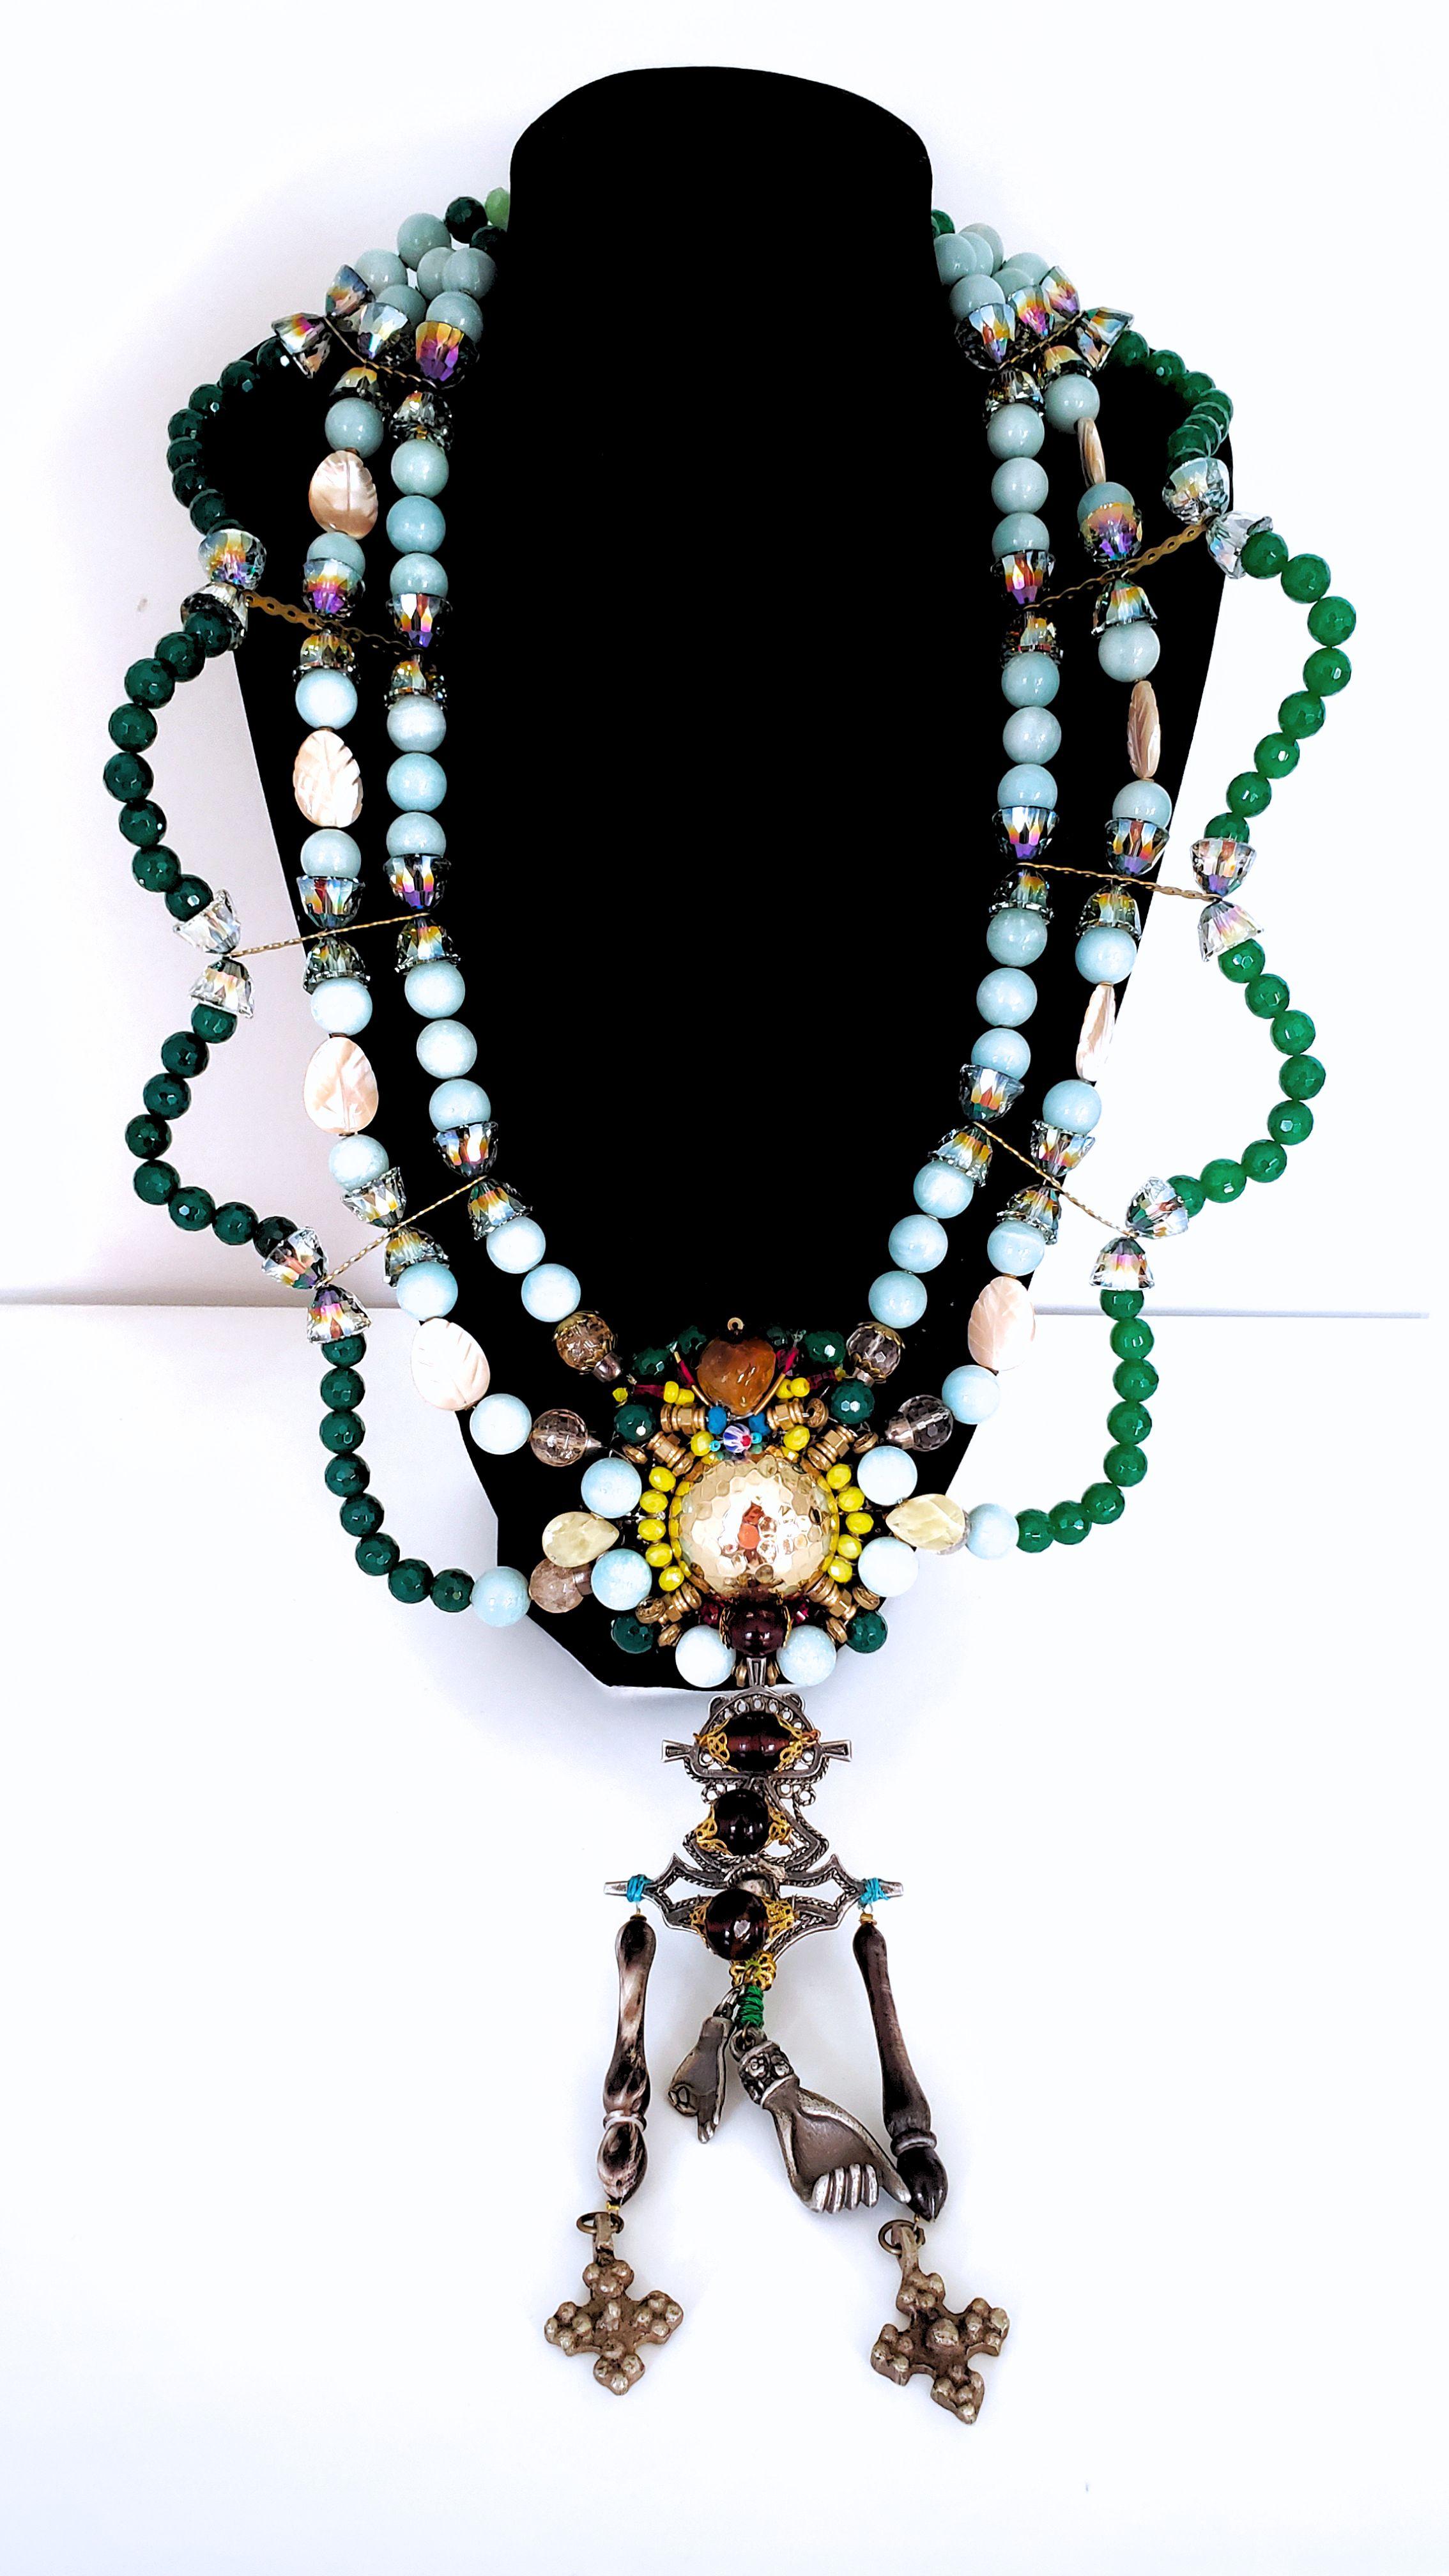 This elaborate multi-strand embellished gemstone And Swarovski crystals statement necklace I have designed from a unique perspective. It is an accumulation and celebration of culture, travel, creativity, and artisanship. Not only is this necklace